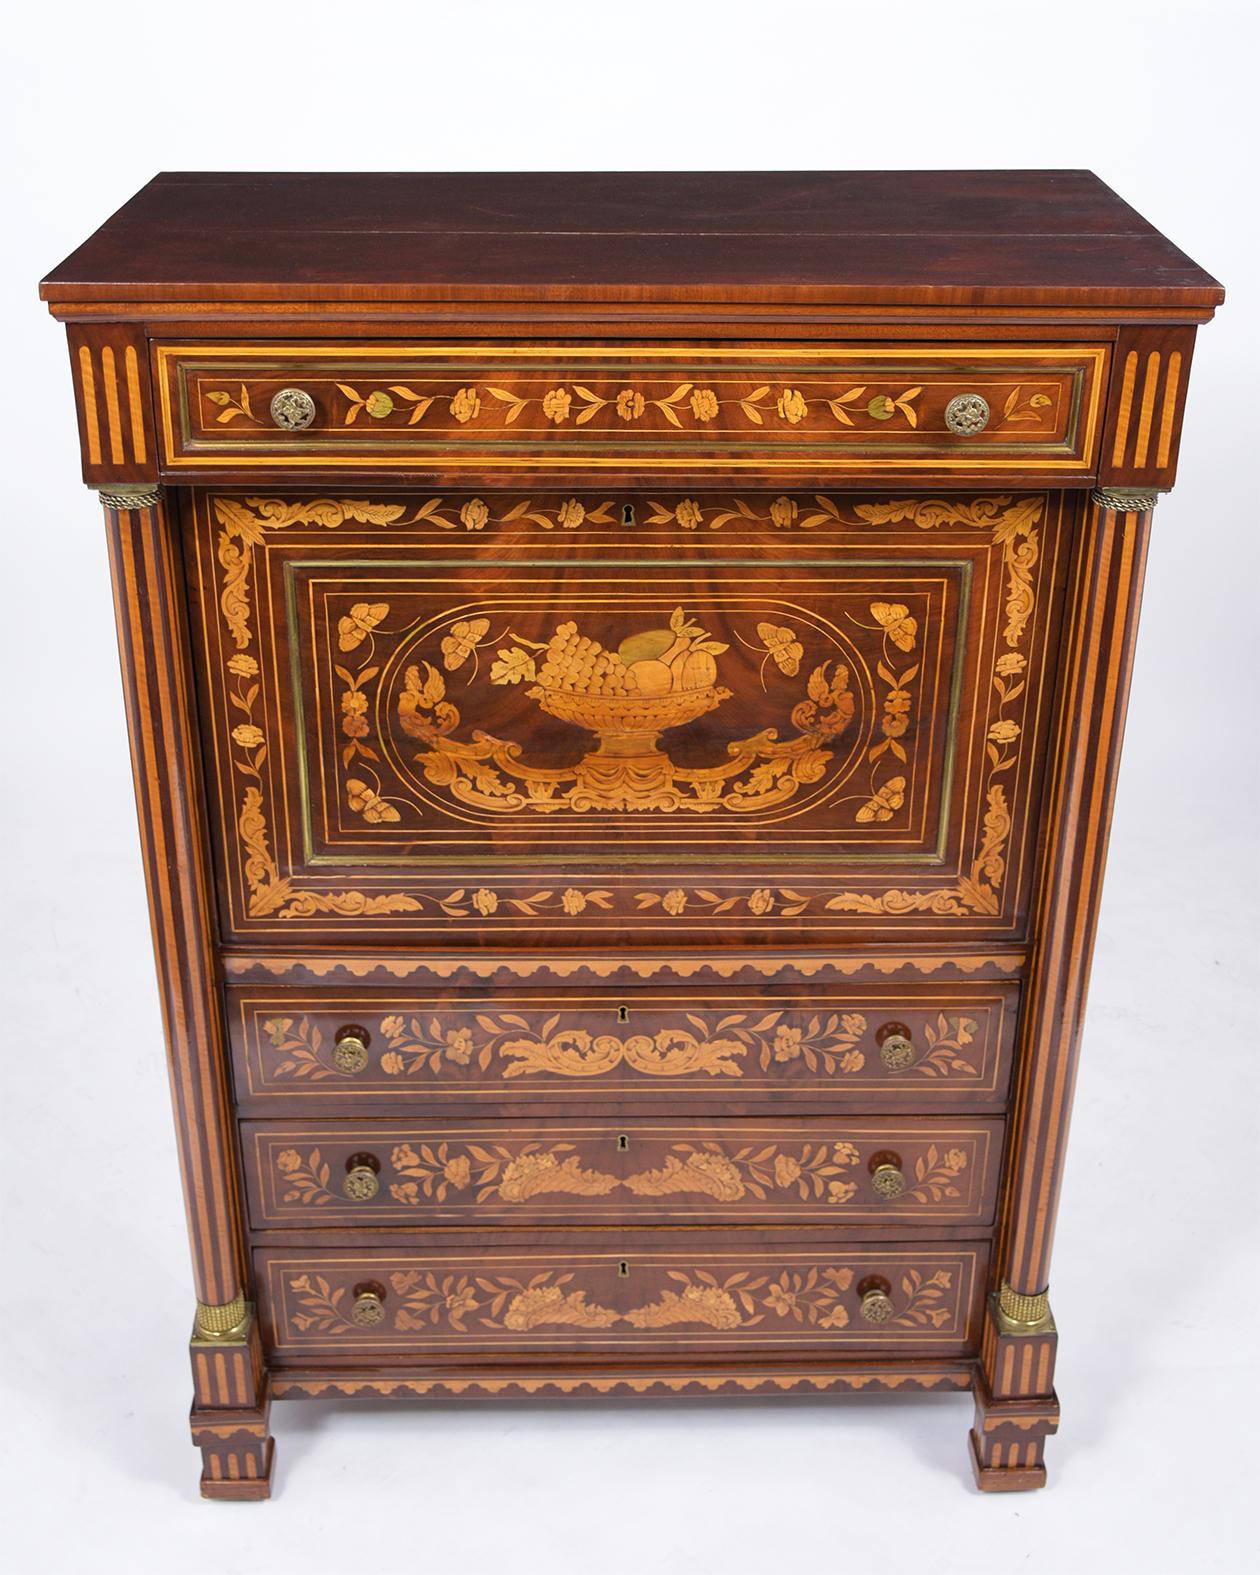 This 19th-century marquetry secretaire is handcrafted out of maple wood good condition, is covered in an elegant marquetry design throughout the piece, and has been newly restored by our team of expert craftsmen. The drop-top desk features four